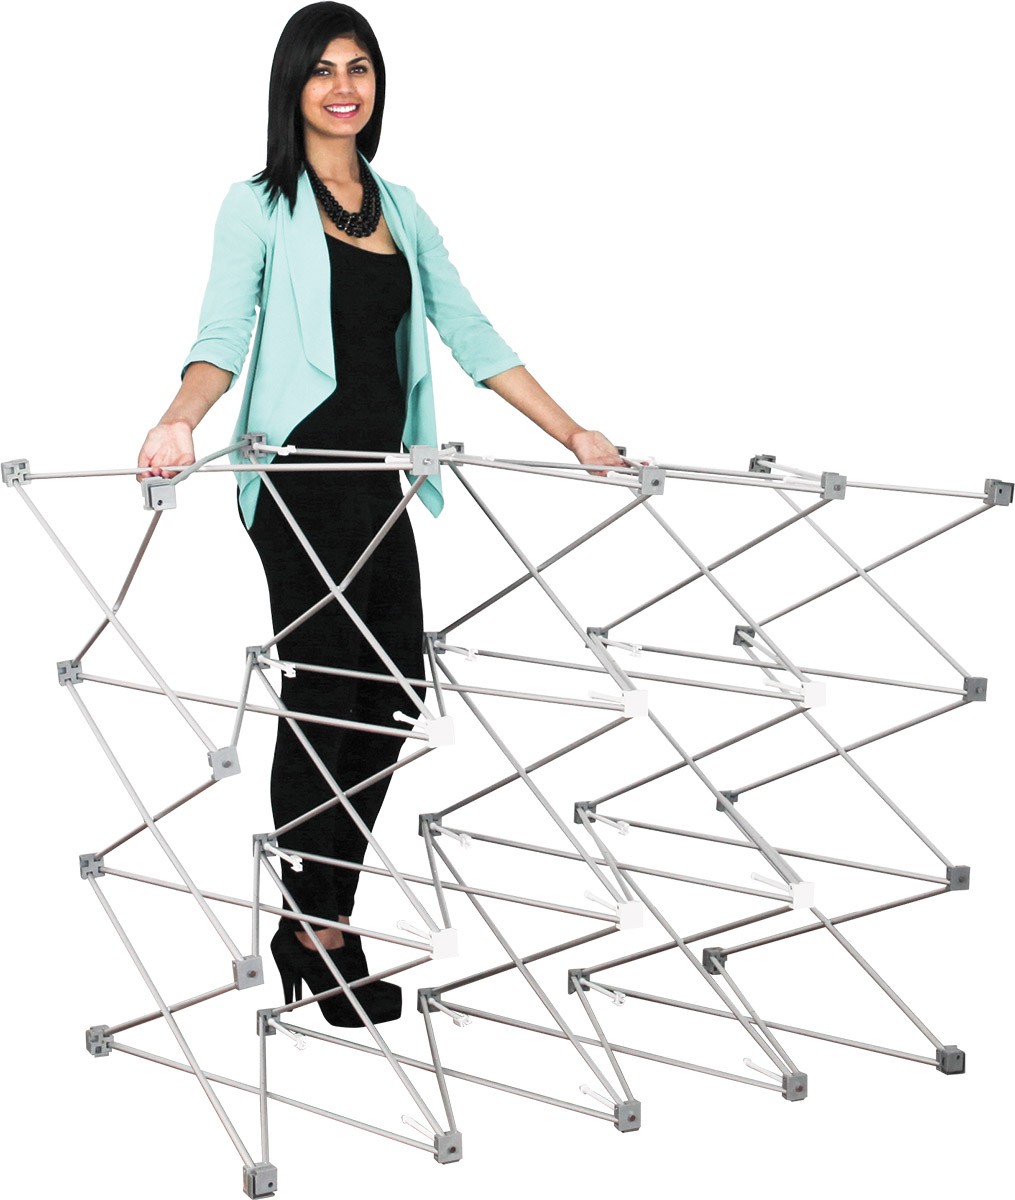 Embrace 12' Extra Tall Tension Fabric Display